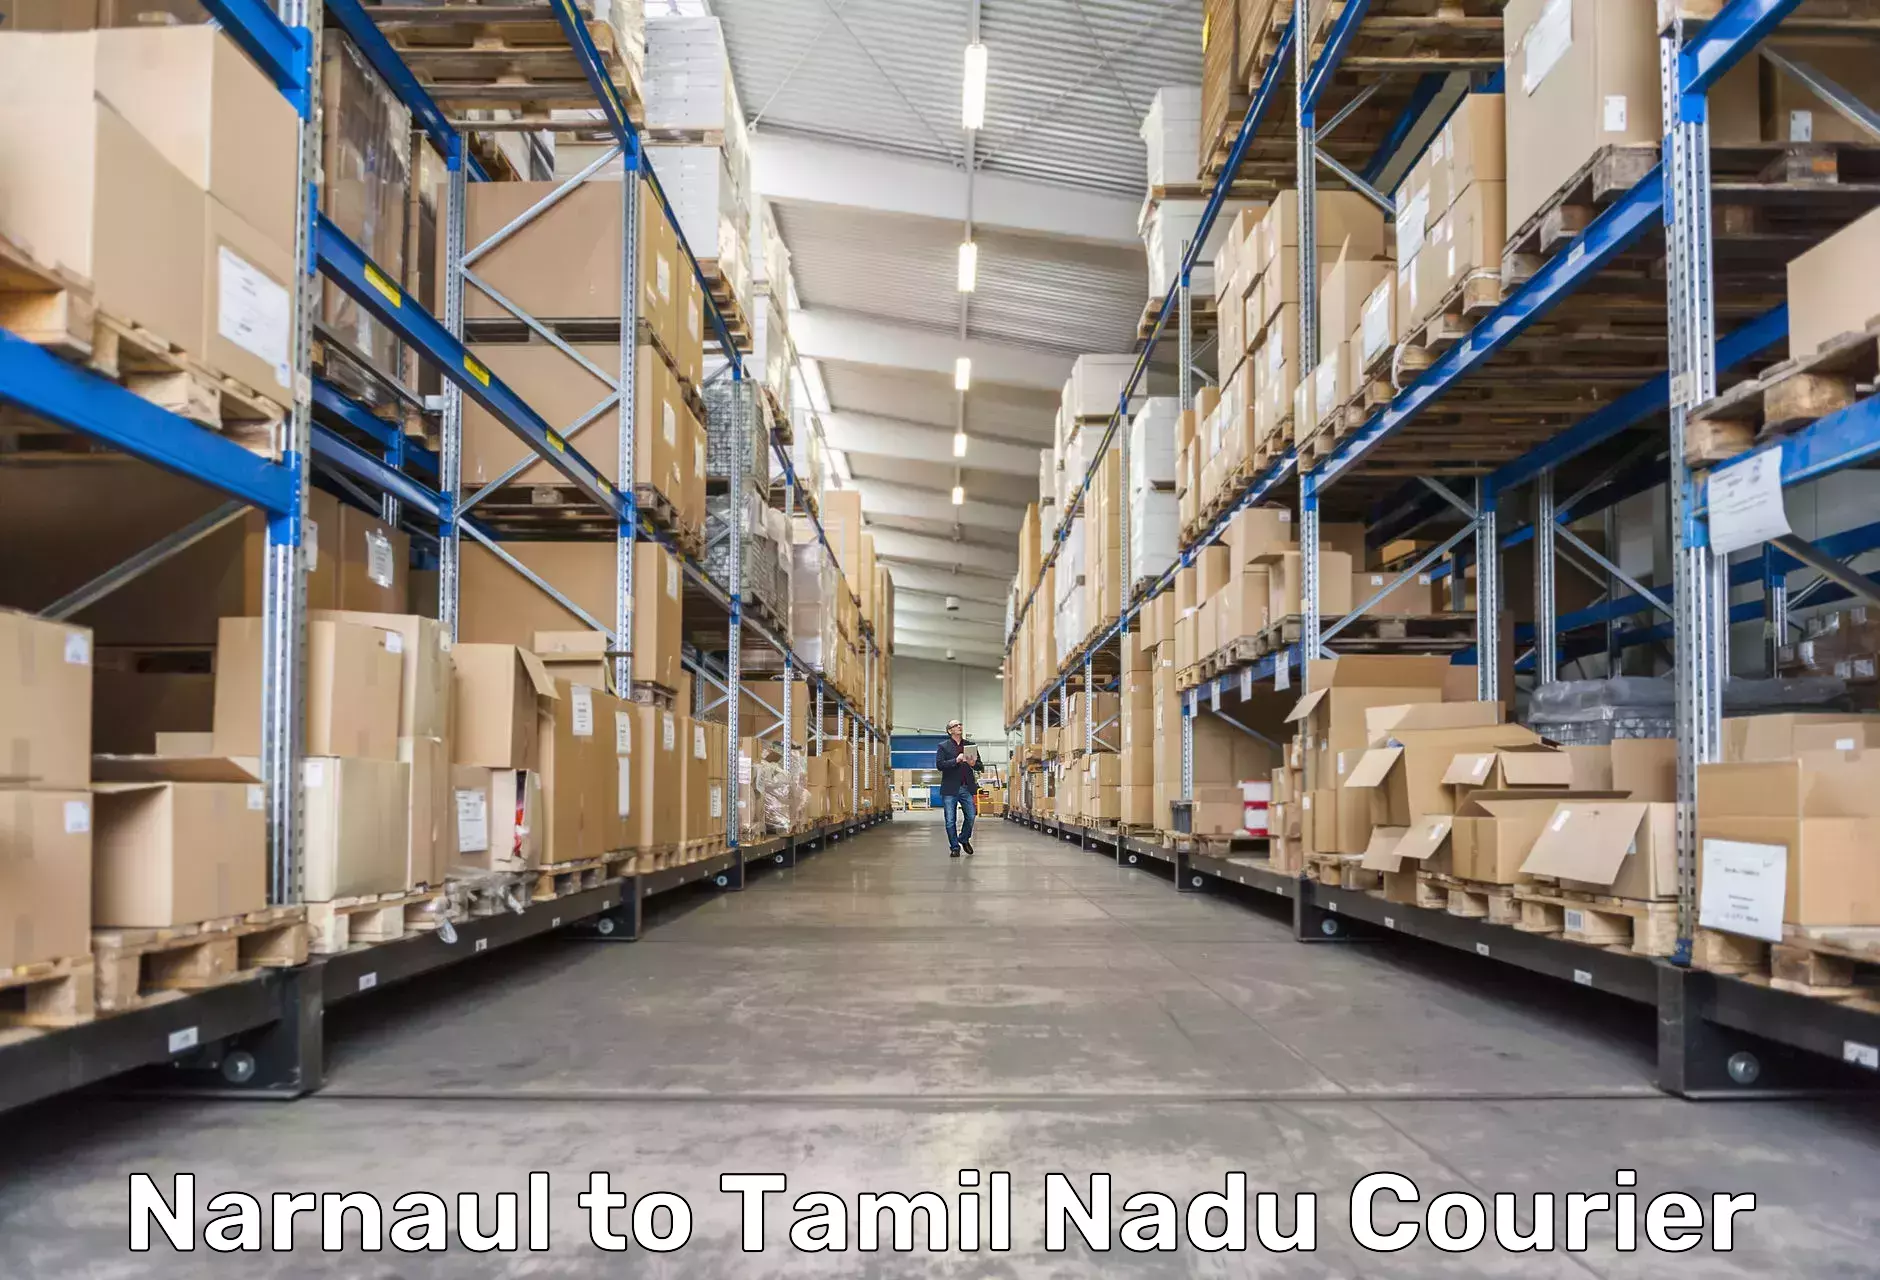 End-to-end delivery Narnaul to IIIT Tiruchirappalli